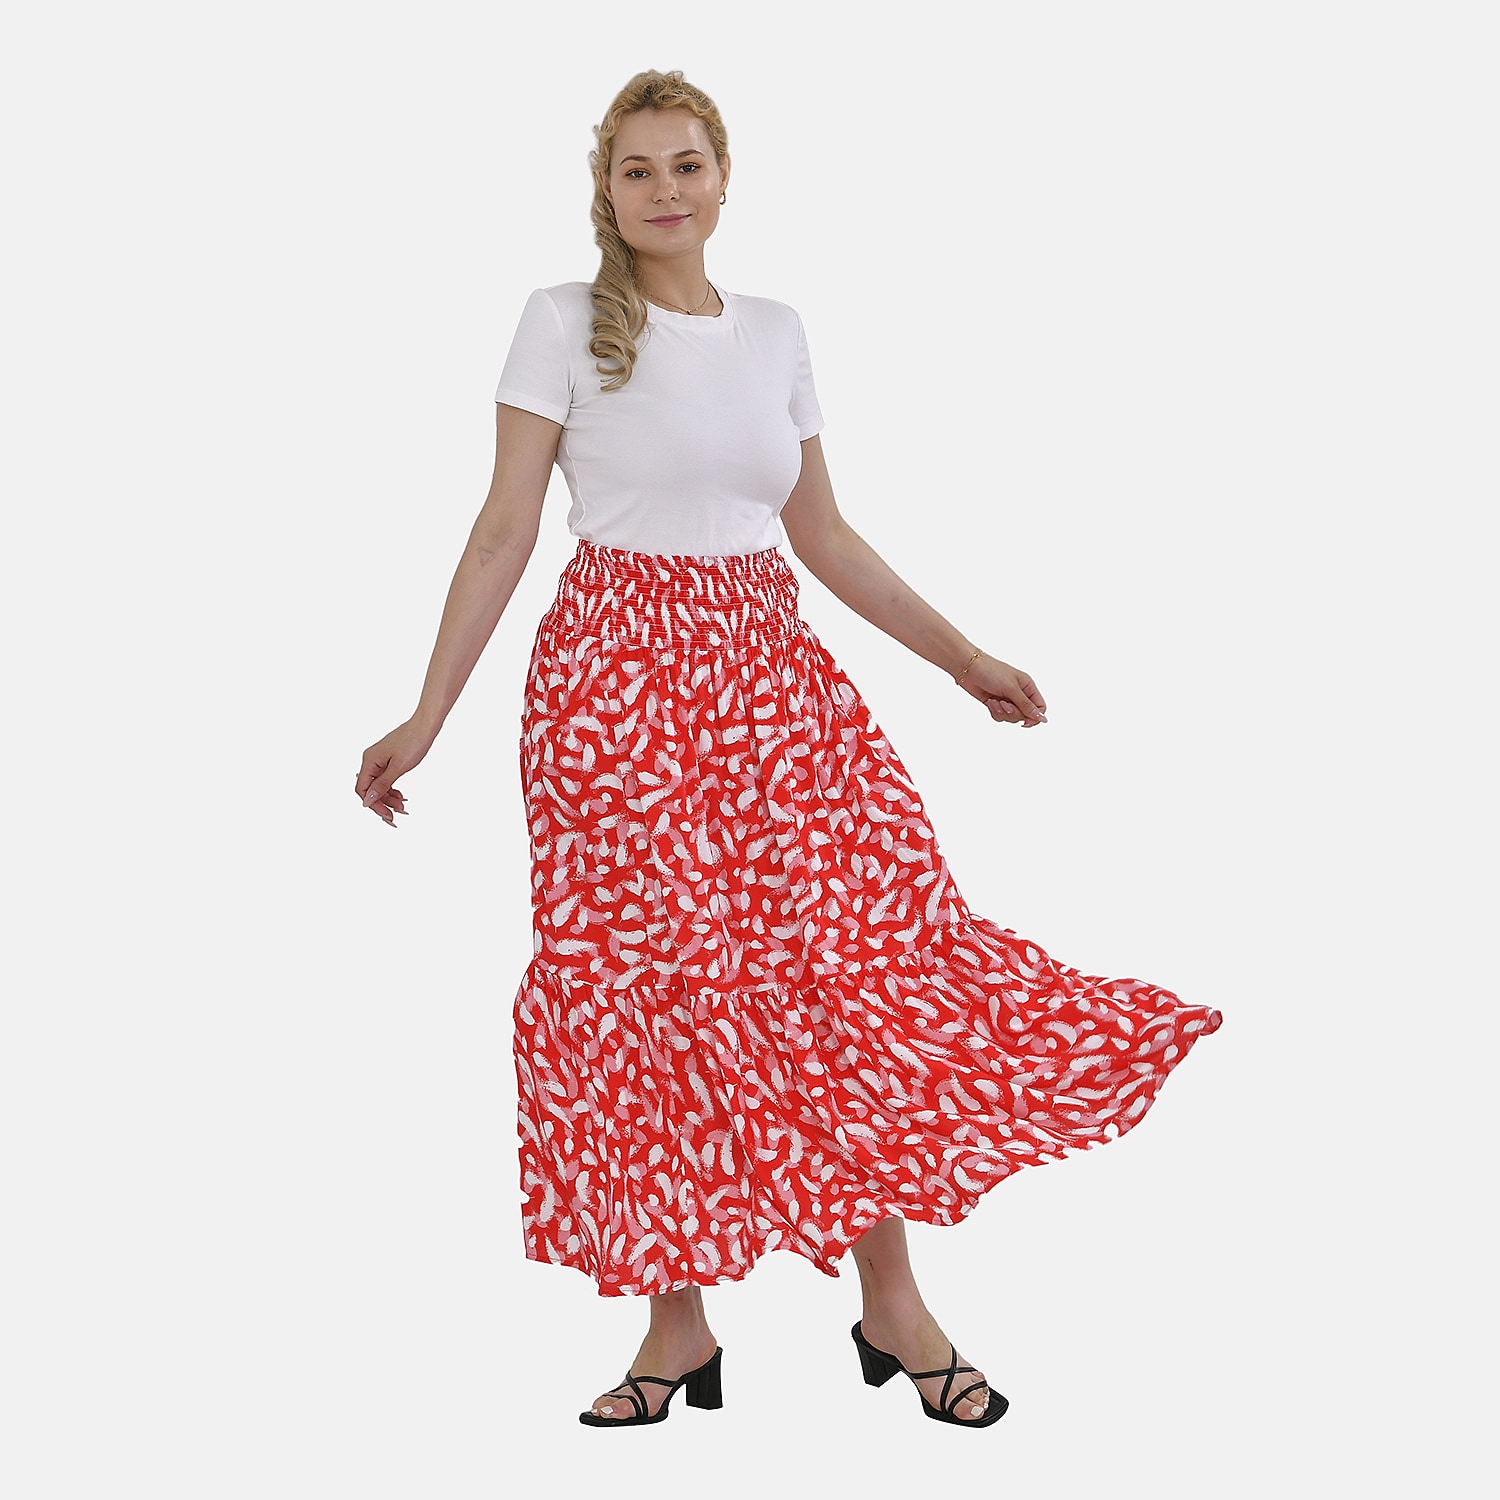 Tamsy-Viscose-Floral-Skirt-Size-91x1-cm-Red-Black